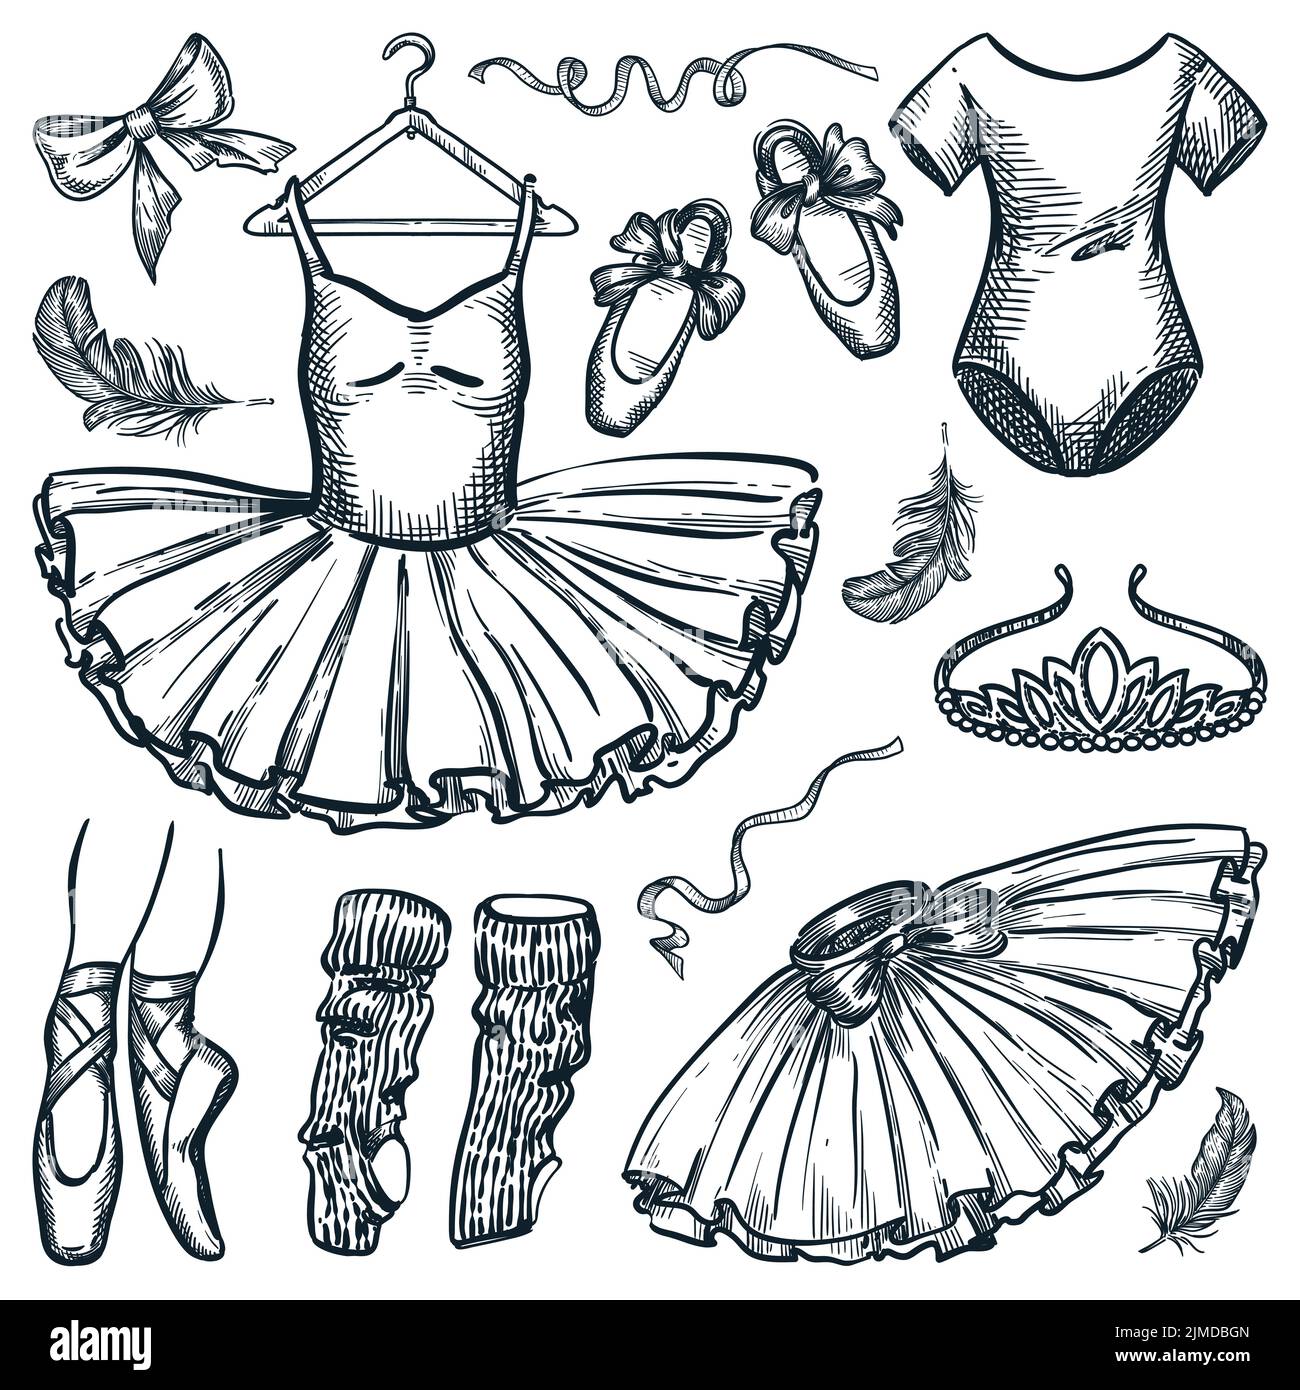 Ballet dance design elements isolated on white background. Vector hand drawn sketch illustration of ballerina dress, pointe shoes, bodysuit and tiara Stock Vector